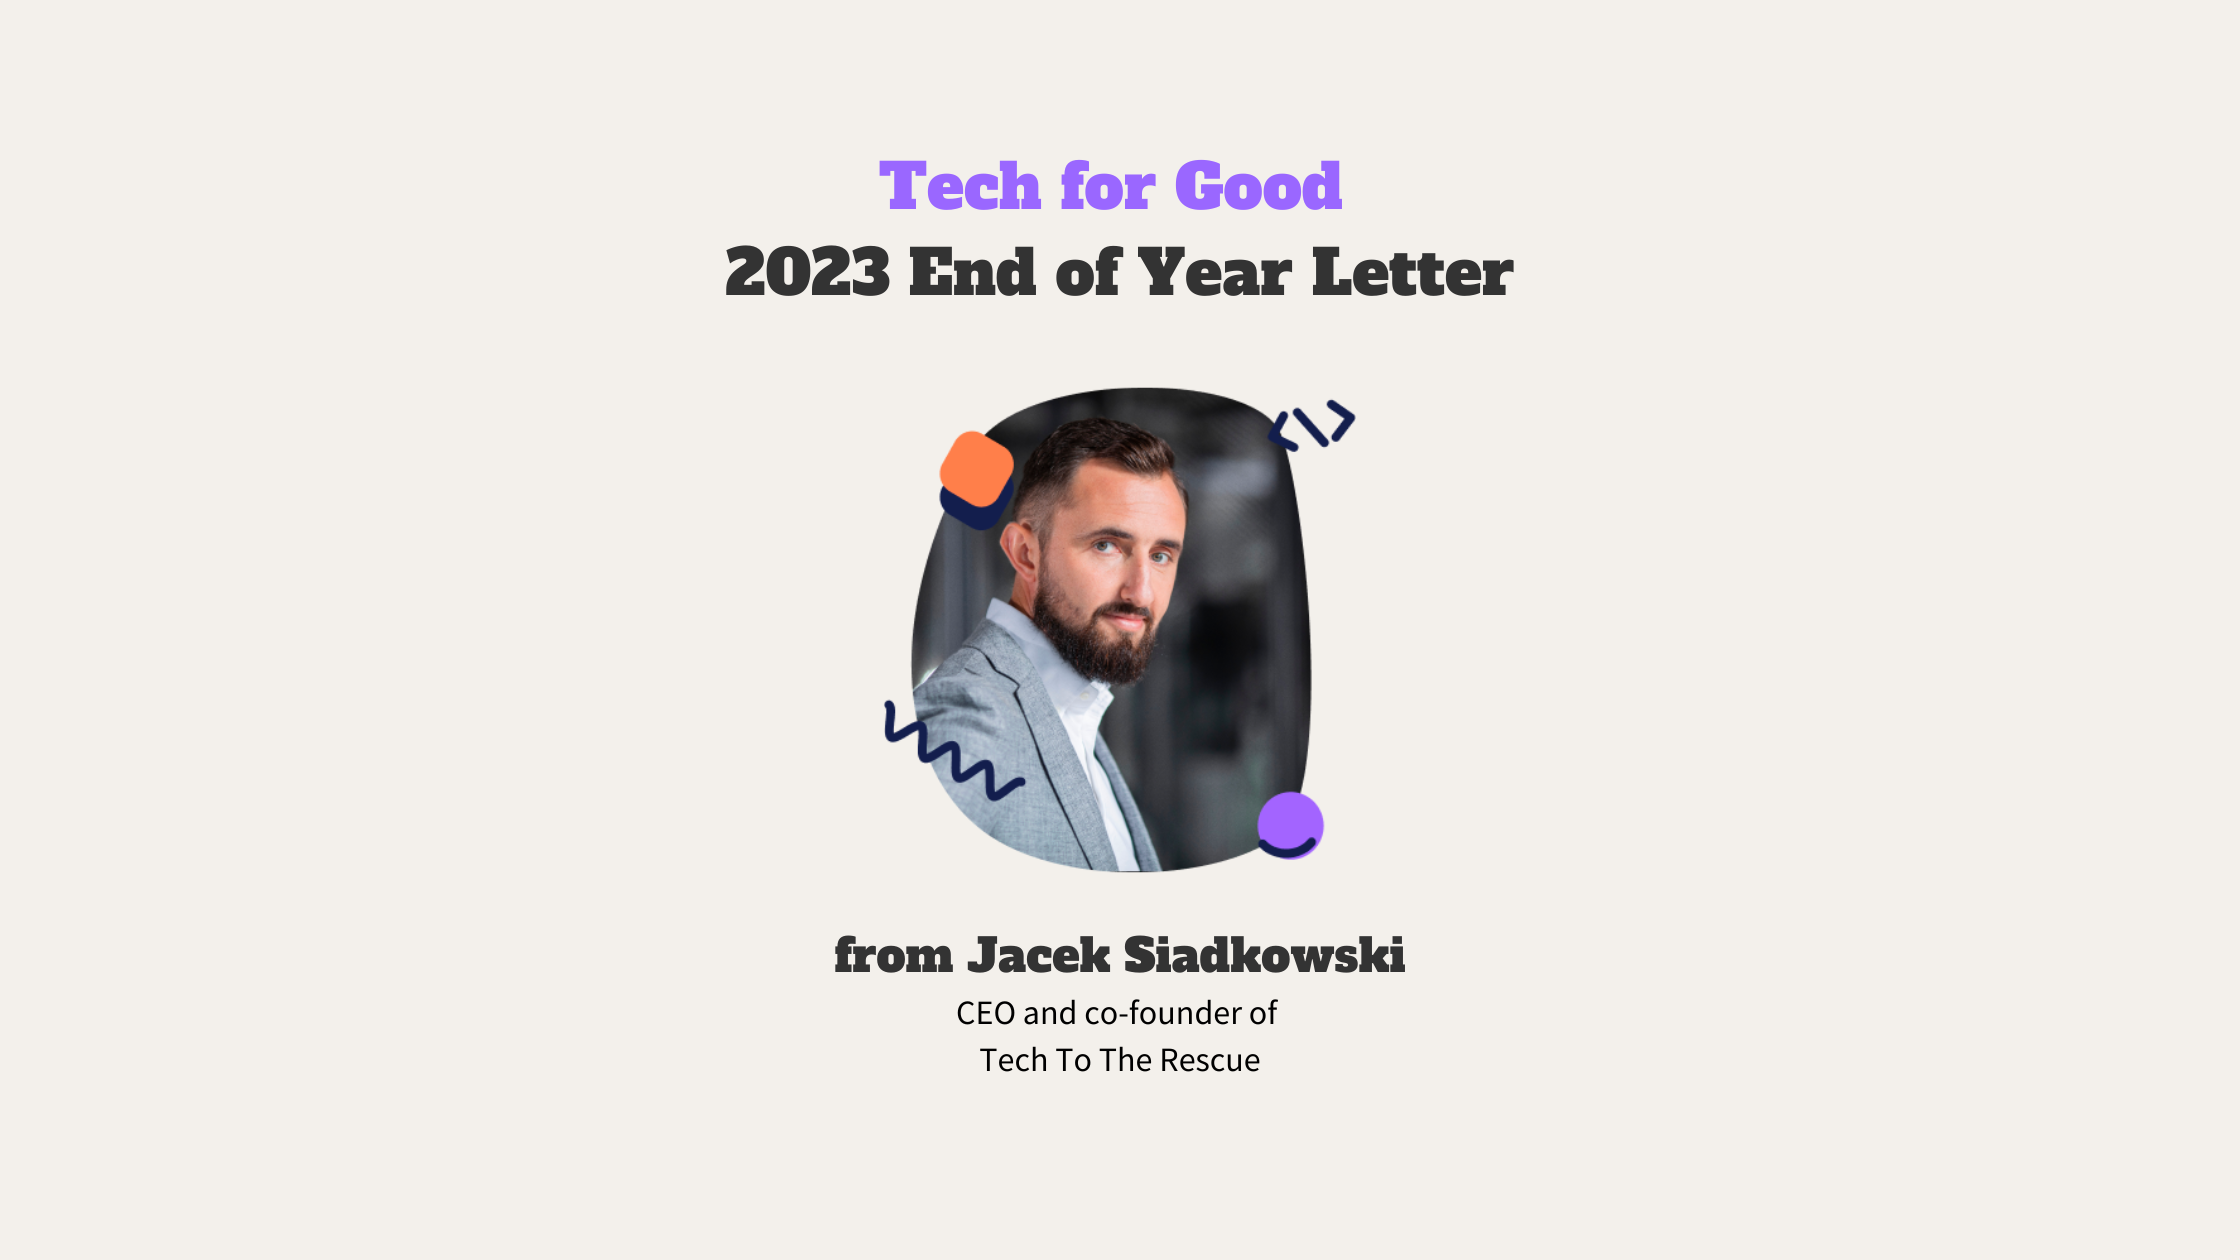 Image : 2023 End of Year Letter from Jacek Siadkowski, CEO of Tech To The Rescue